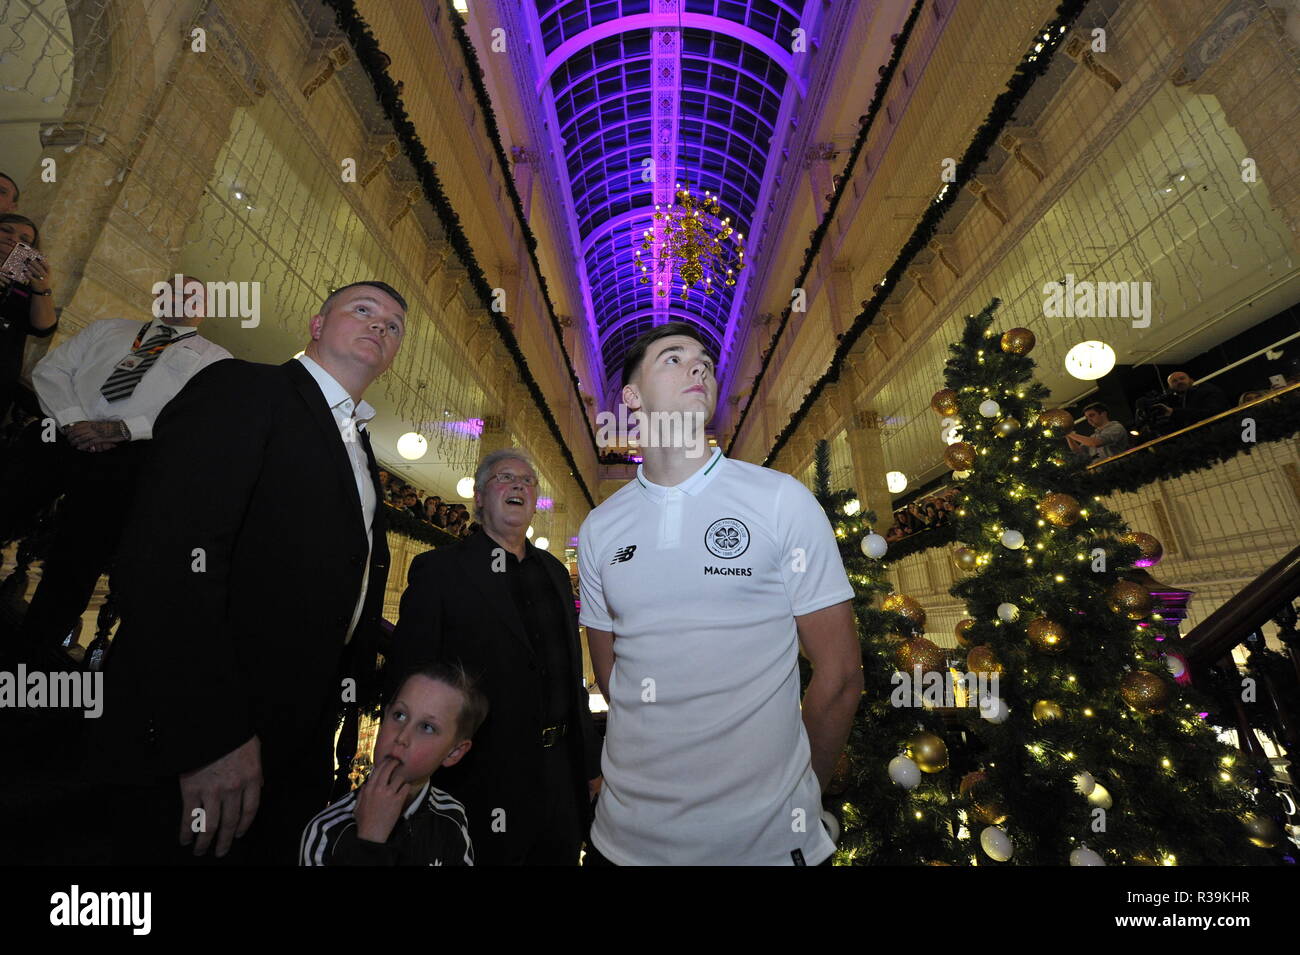 Glasgow, Scotland, UK. 22nd November 2018. Celtic's ace, Kieran Tierney switches on the Iconic Frasers Christmas lights at Mike Ashley's new House Of Fraser in Glasgow.  The event is to raise funds for St Margaret of Scotland Hospice in Clydebank. Credit: Colin Fisher/Alamy Live News Stock Photo